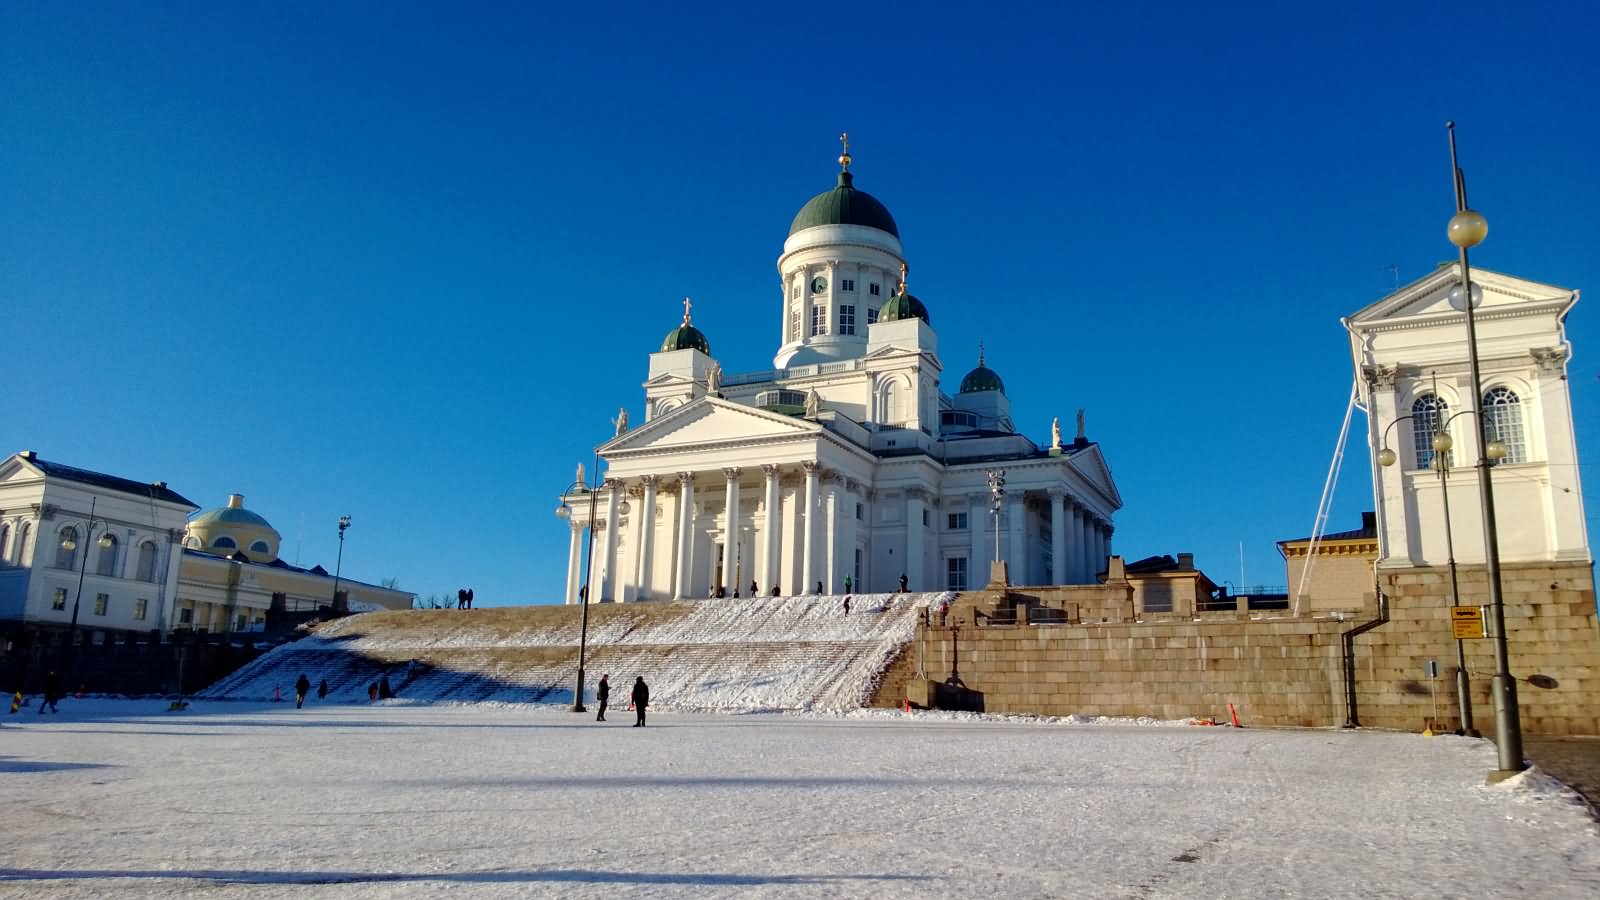 Side View Of The Helsinki Cathedral In Finland